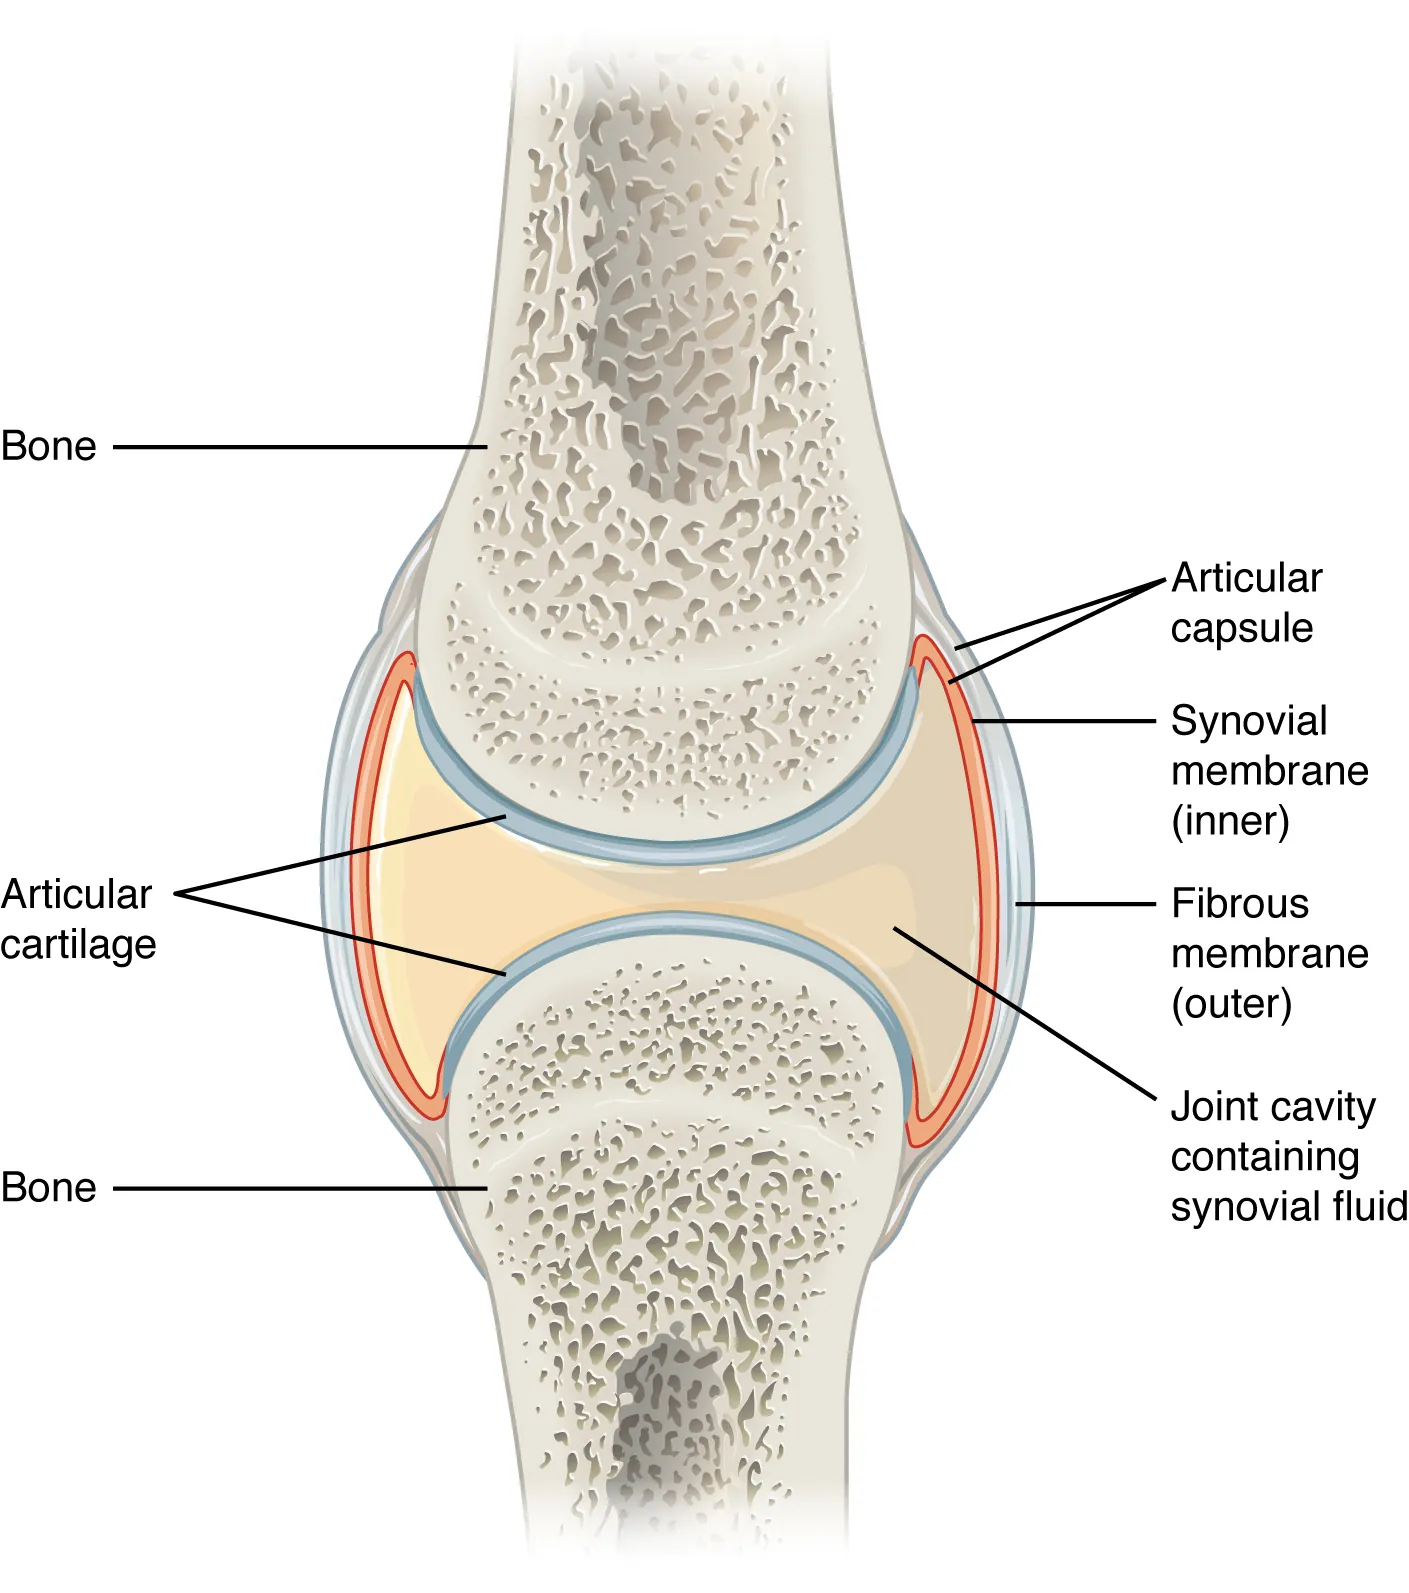 This figure shows a synovial joint. The cavity between two bones contains the synovial fluid which lubricates the two joints.